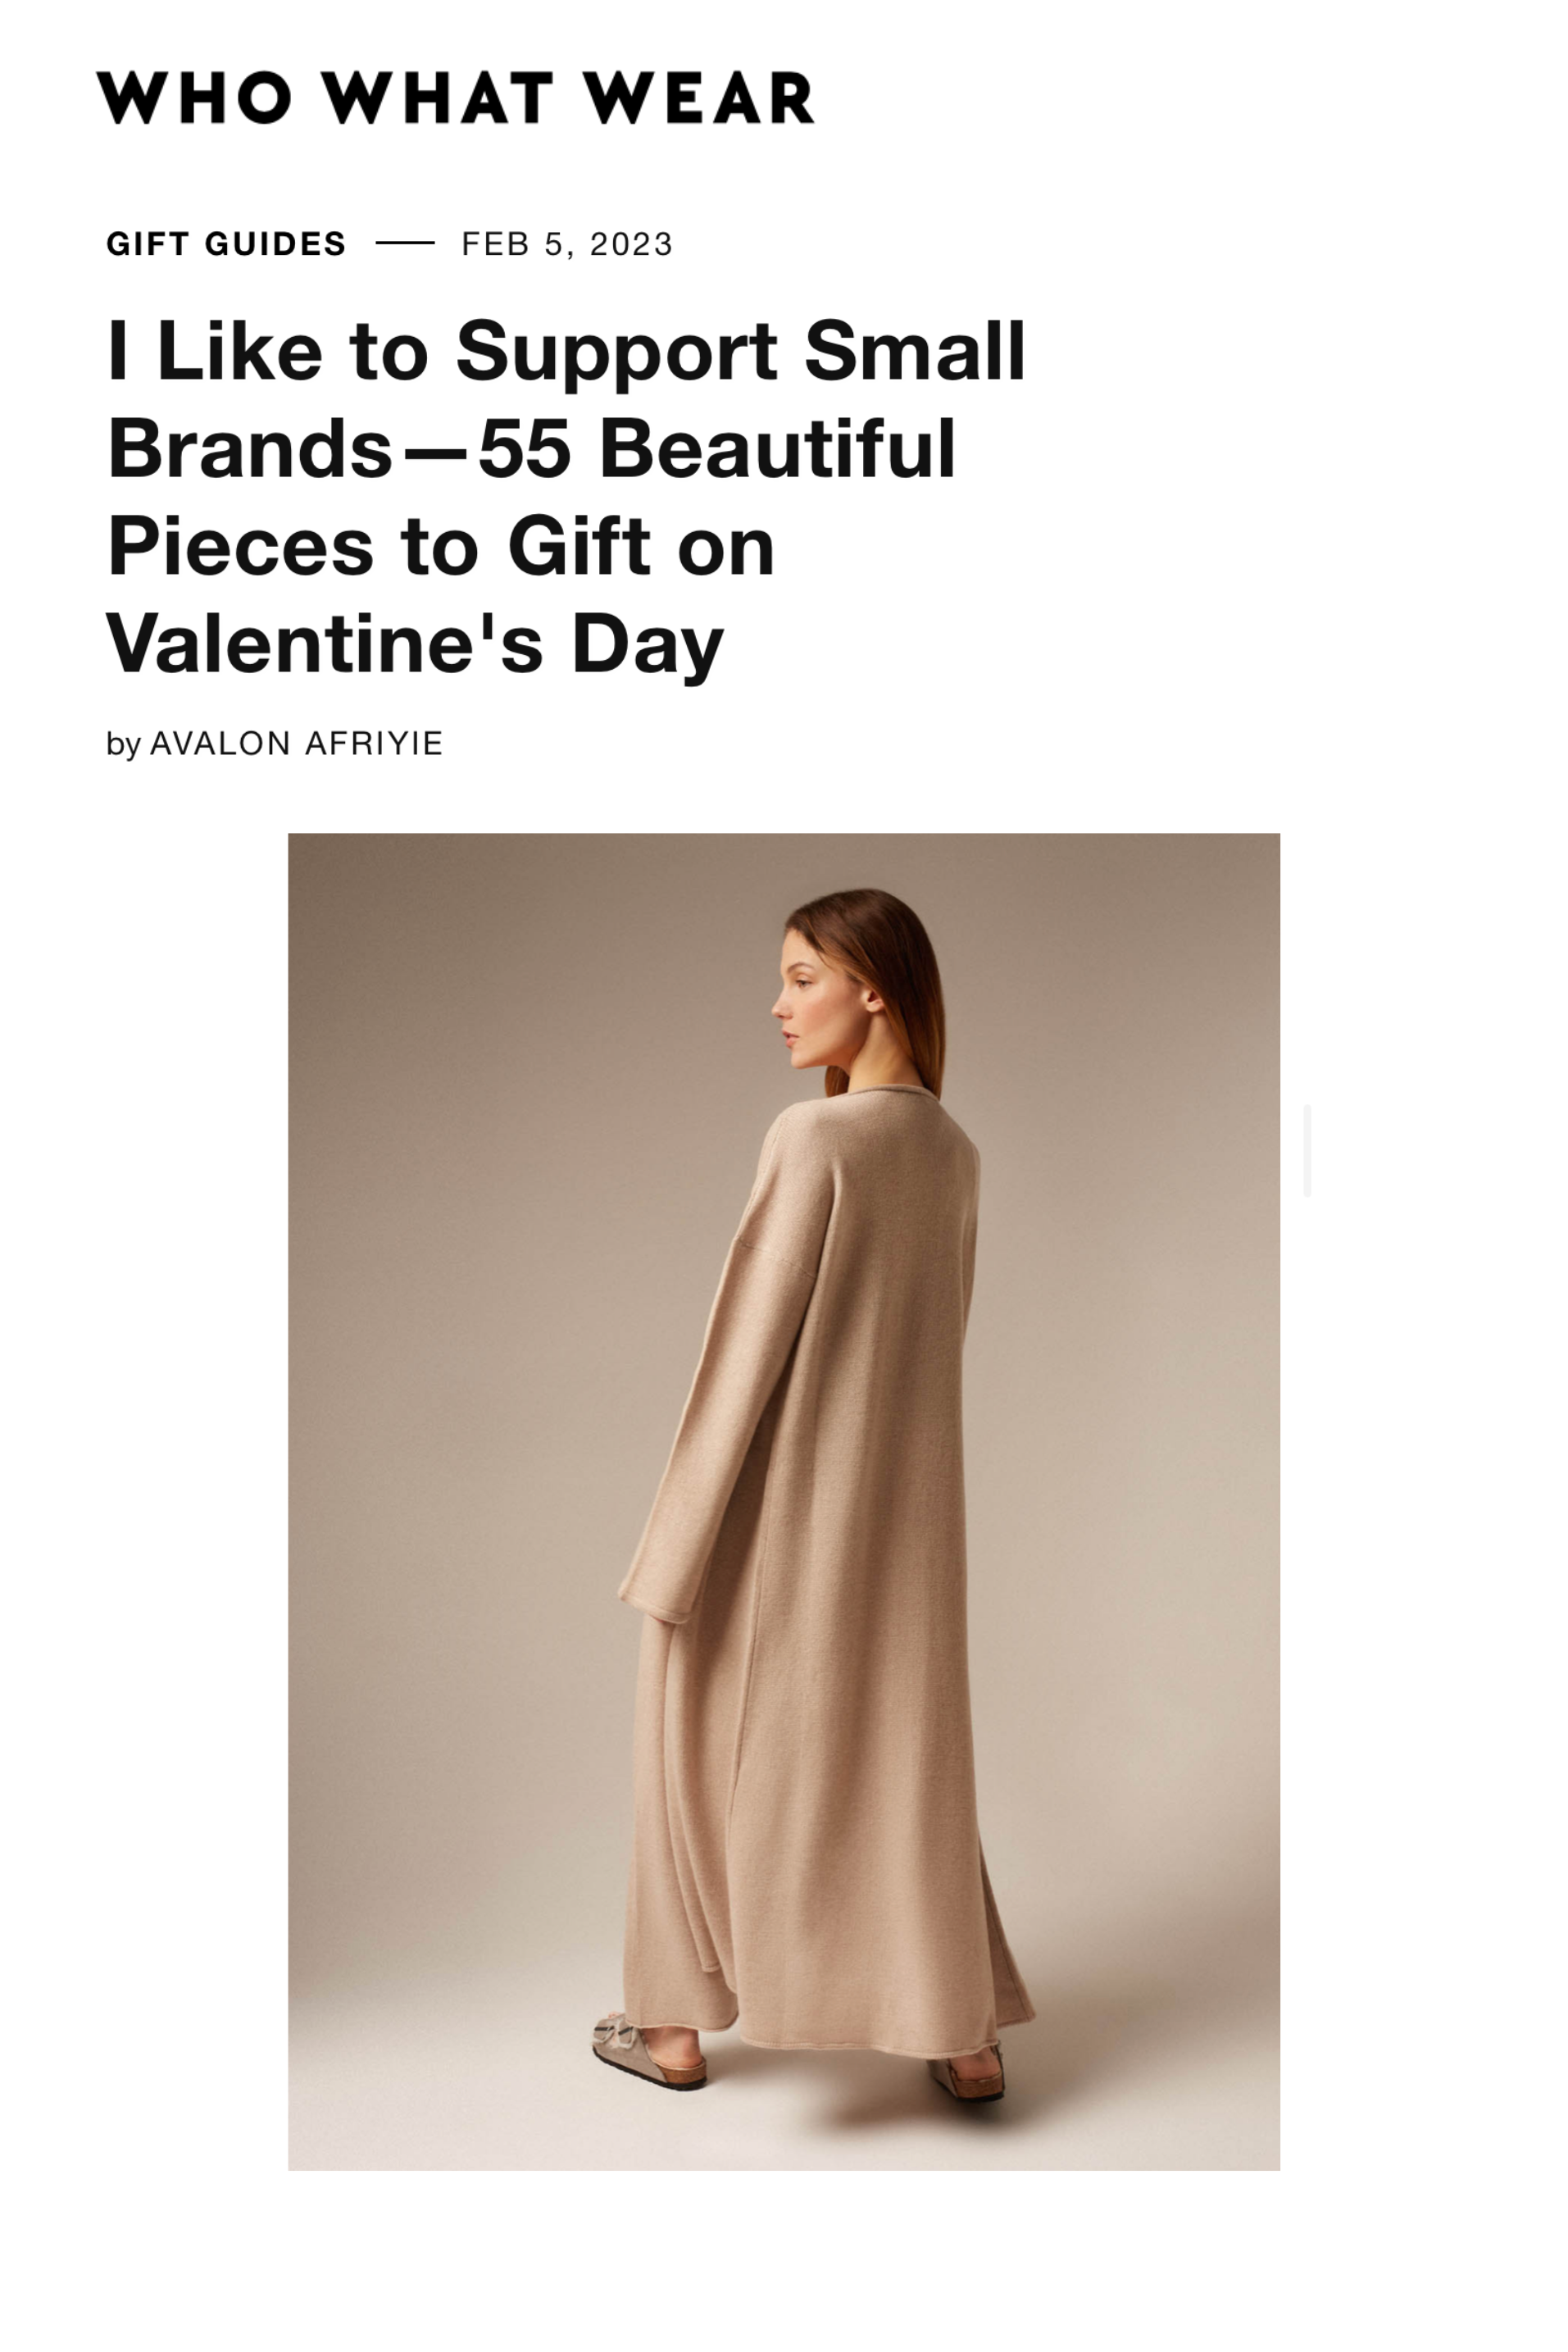 WHO WHAT WEAR | 55 Beautiful Pieces to Gift on Valentine's Day